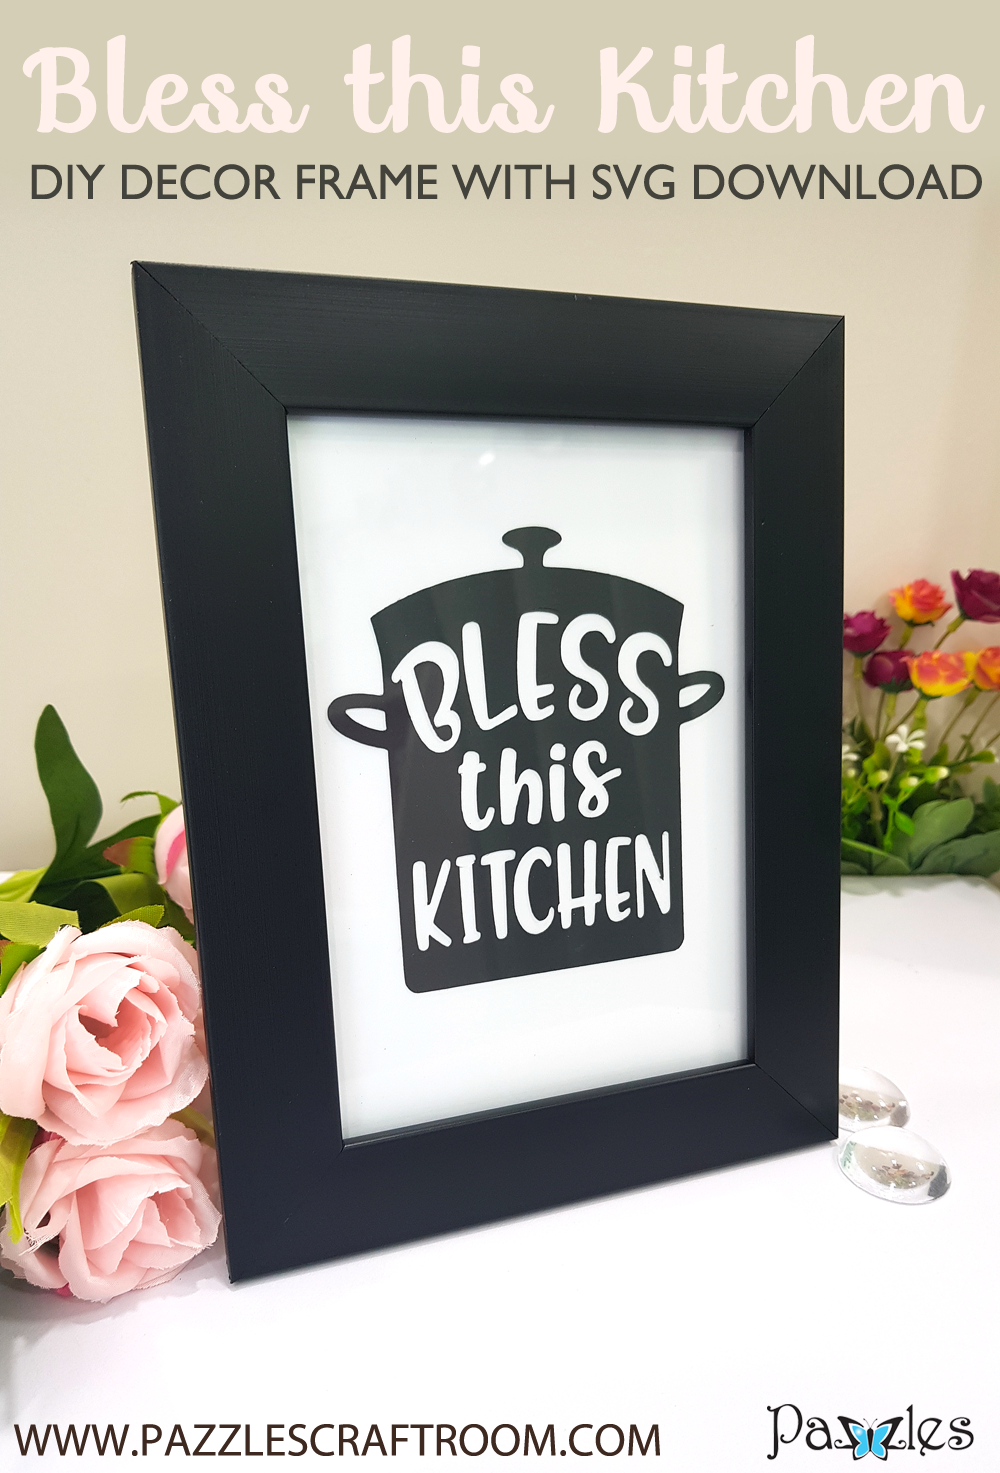 Pazzles DIY Bless this Kitchen Frame with instant SVG download. Compatible with all major electronic cutters including Pazzles Inspiration, Cricut, and Silhouette Cameo. Design by Nida Tanweer.